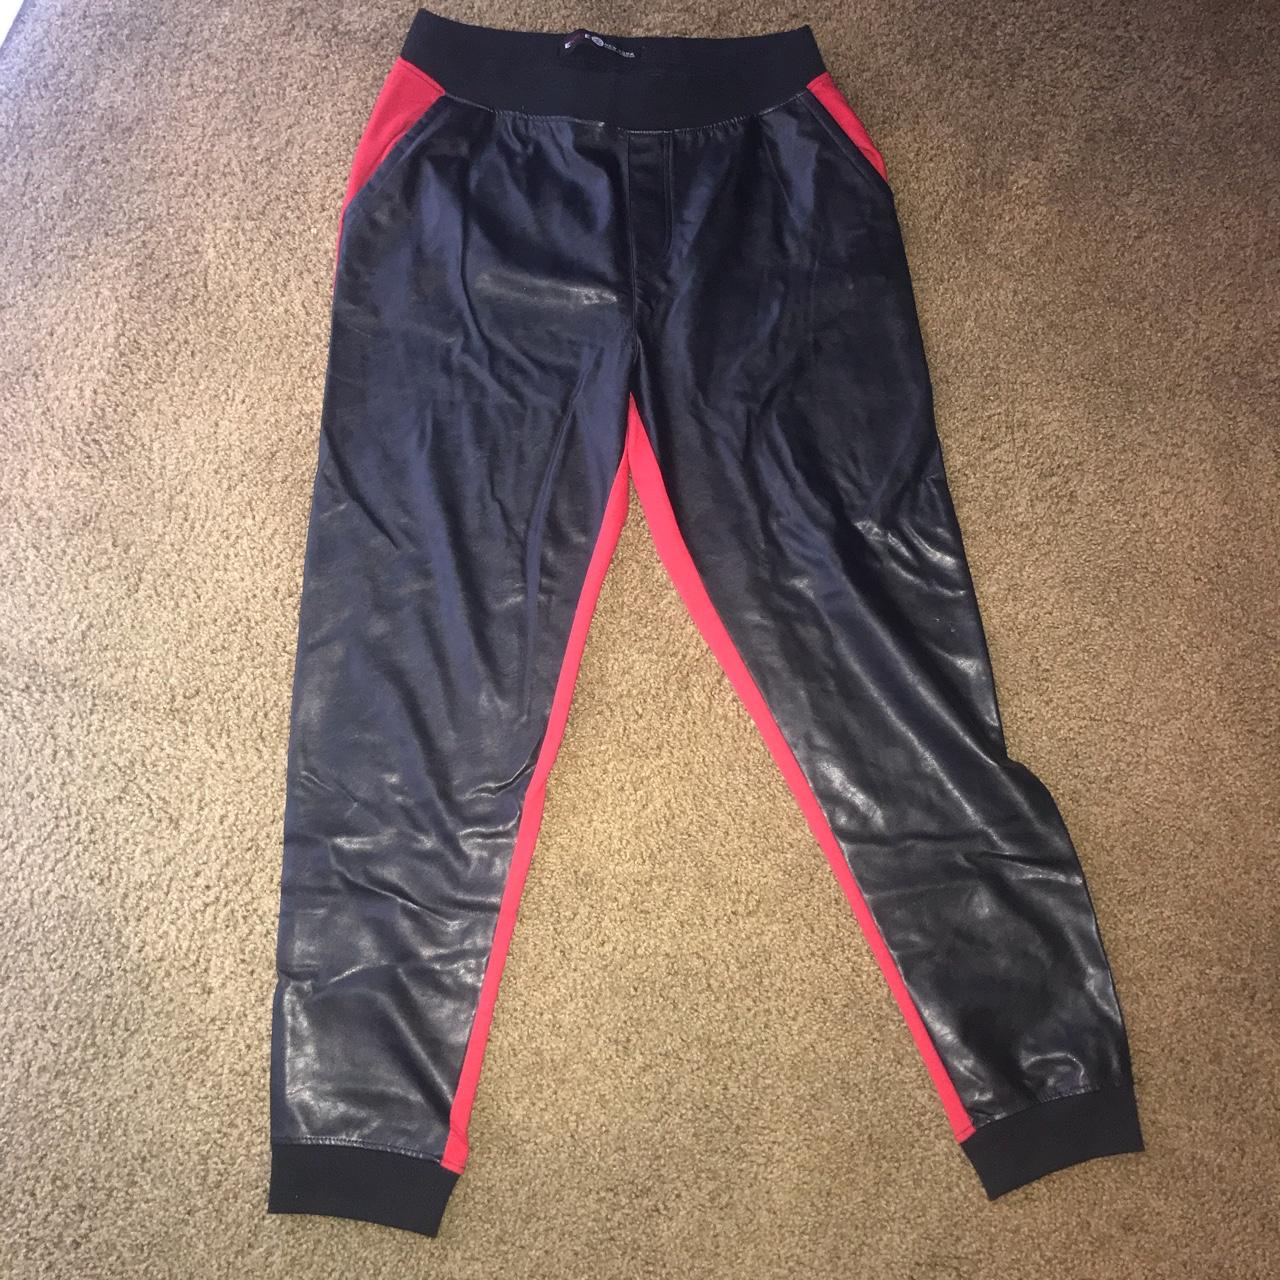 Large Enyce Joggers slightly worn shown in picture... - Depop